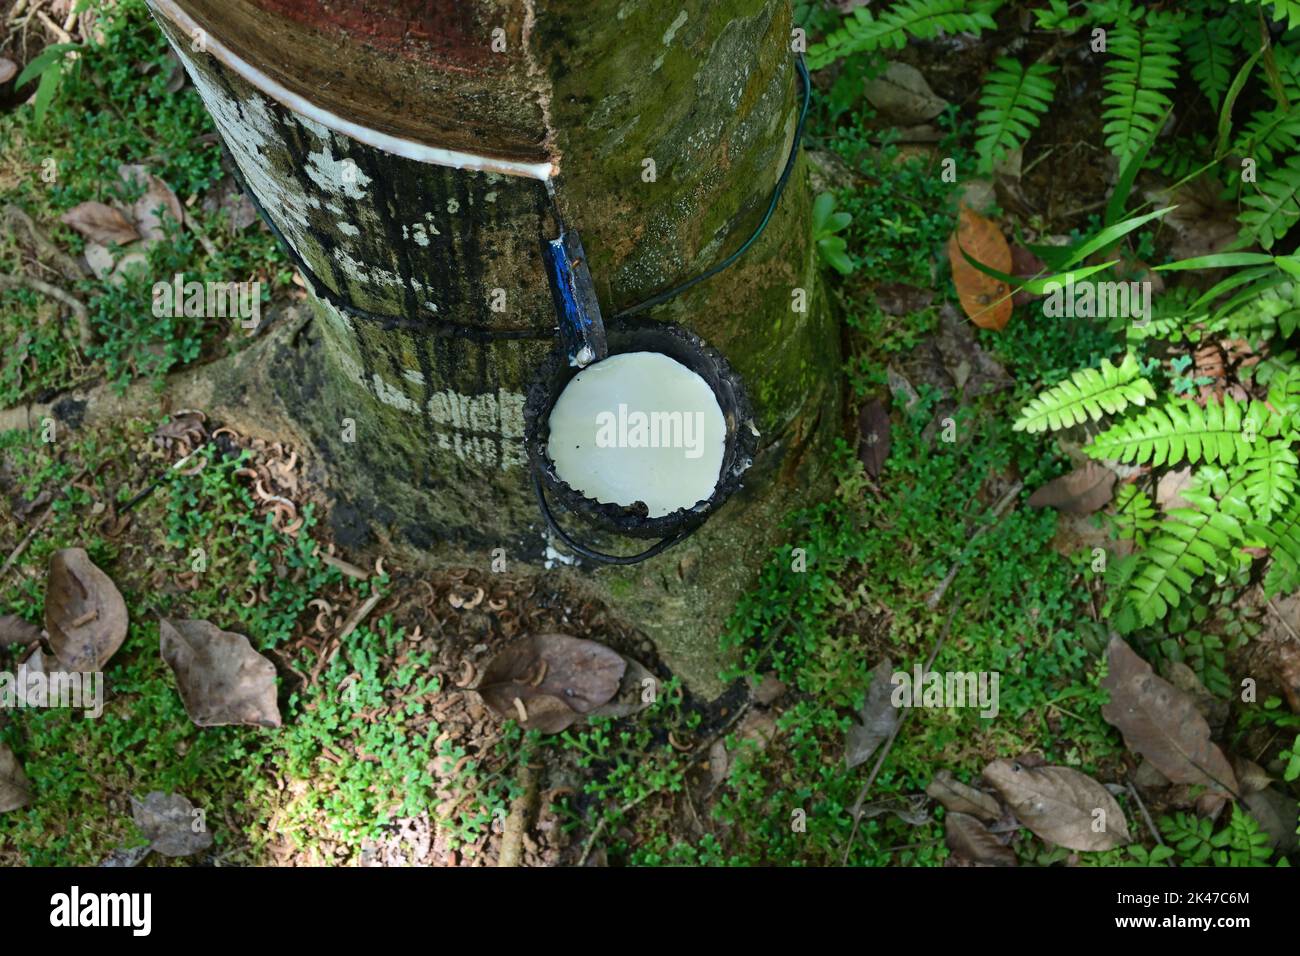 High angle view of a rubber sap or milk filled coconut shell cup attached on a stem of a rubber tree Stock Photo